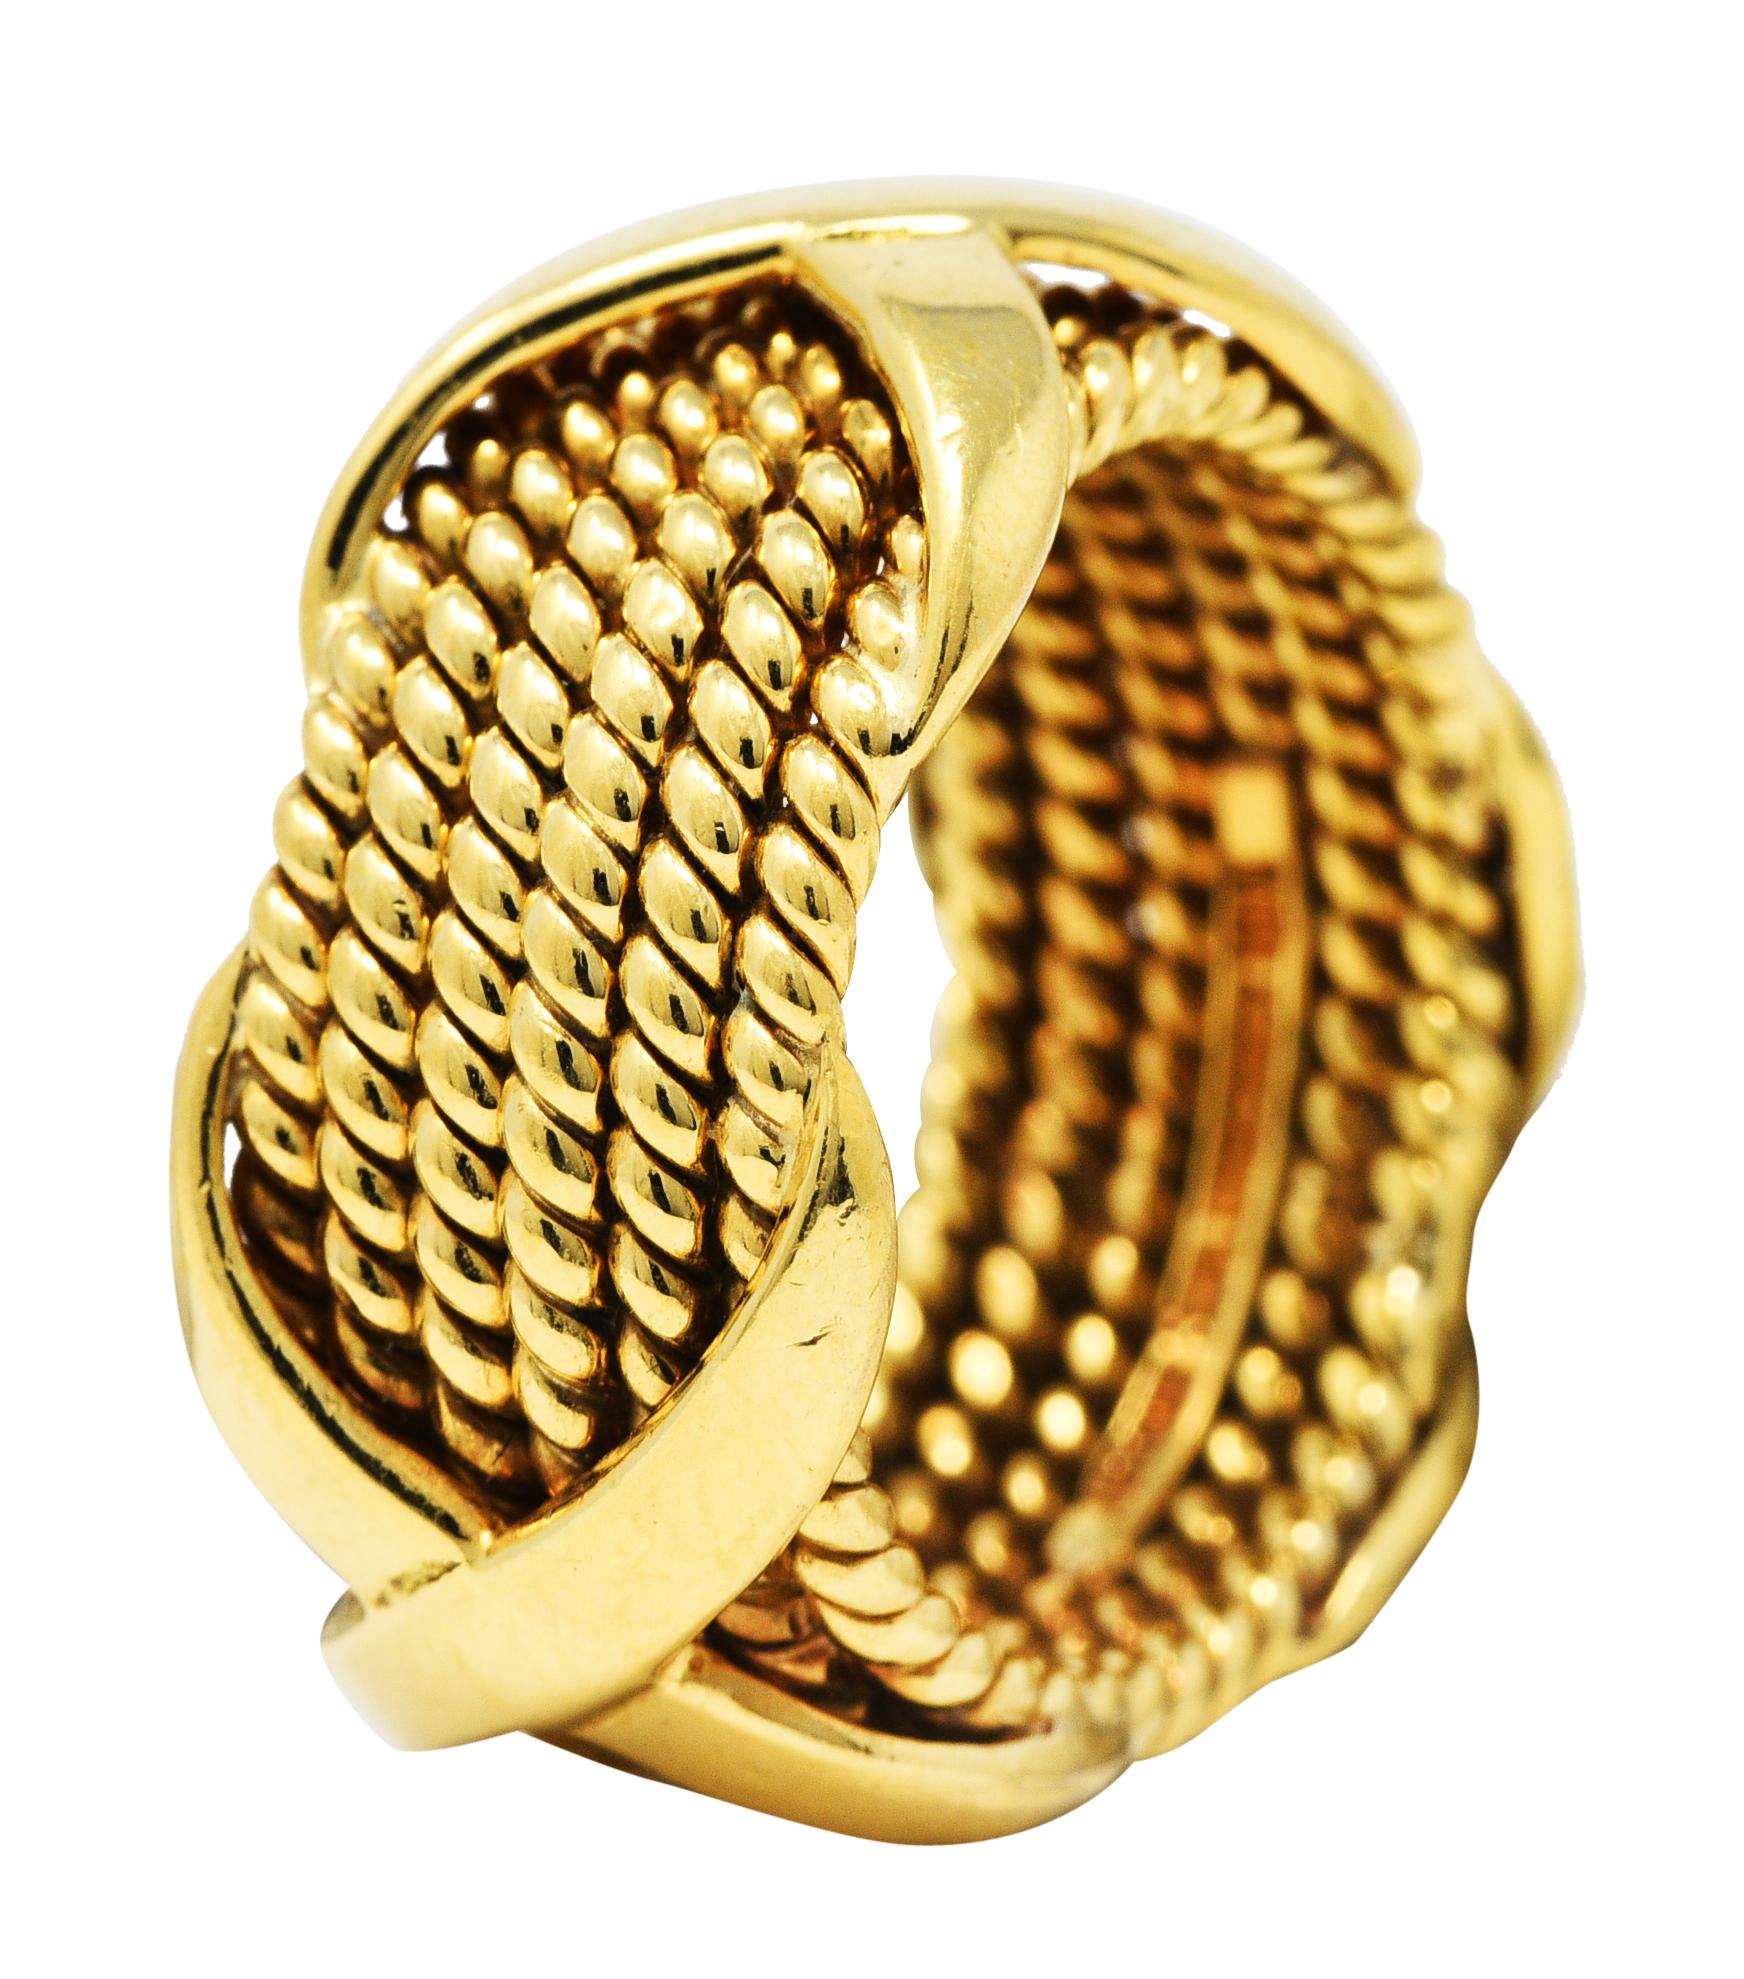 Band ring is comprised of six segments of twisted gold rope

With three stylized X stations

Stamped 18k for 18 karat gold

Numbered and fully signed Tiffany Schlumberger

For Jean Schlumberger and Tiffany & Co.

Circa: 1960's

Ring size: 6 1/2 and